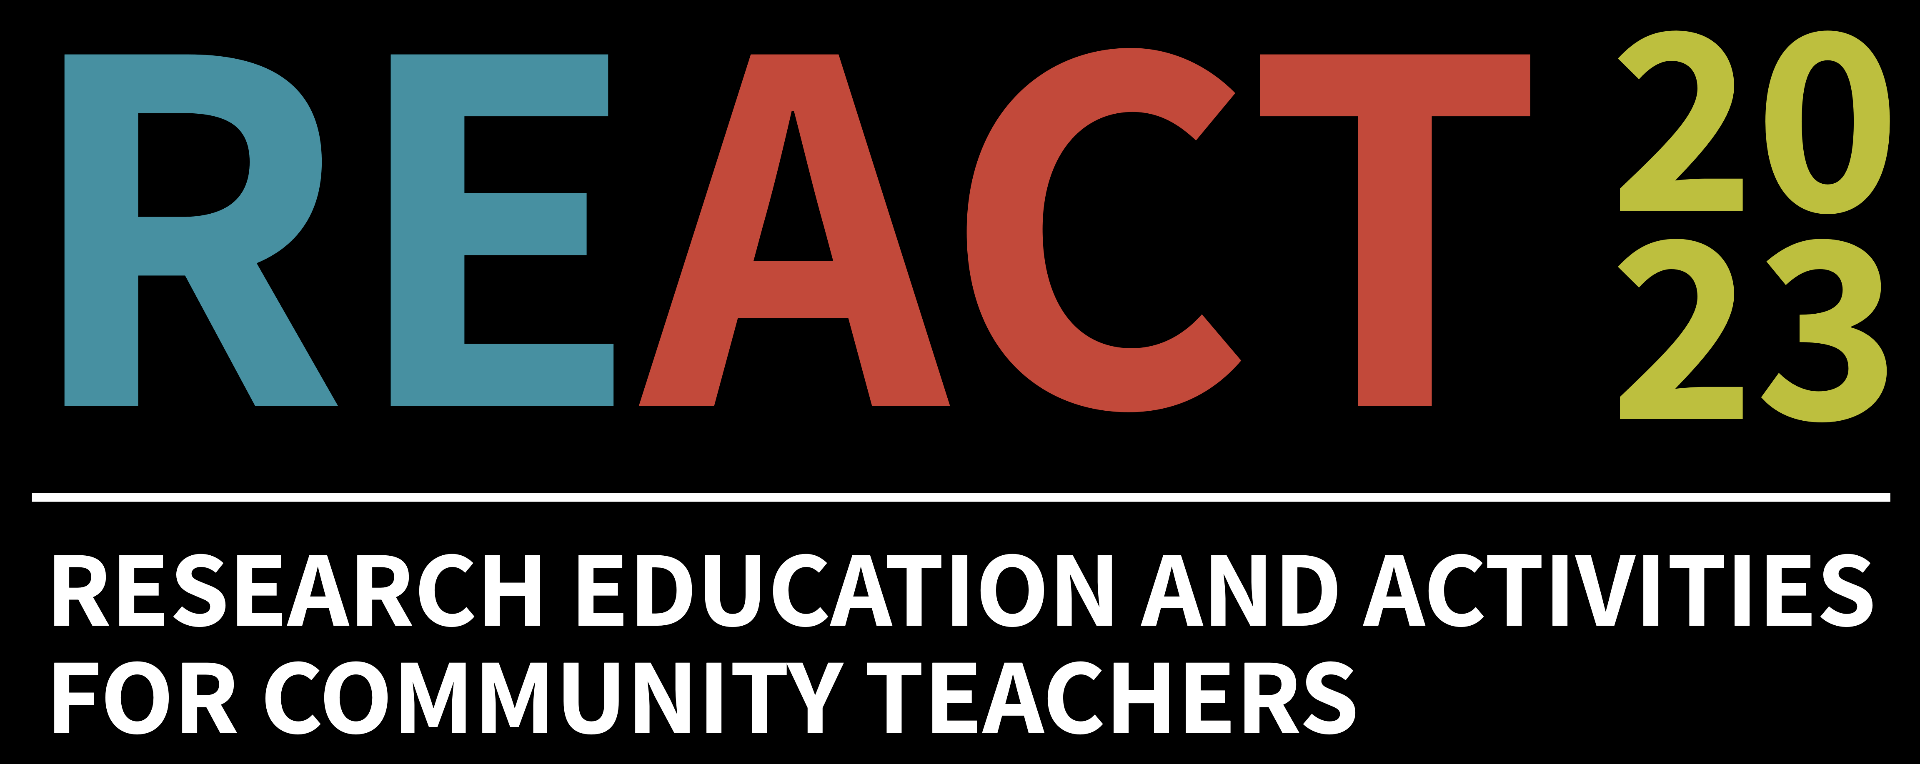 Research Education and Activities for Community Teachers (REACT): REACT is a free online science workshop for educators in New York. The event consists of research-focused talks, lab tours, and fun at-home experimental or computational activities in the topics of physics, chemistry, engineering, and materials science.